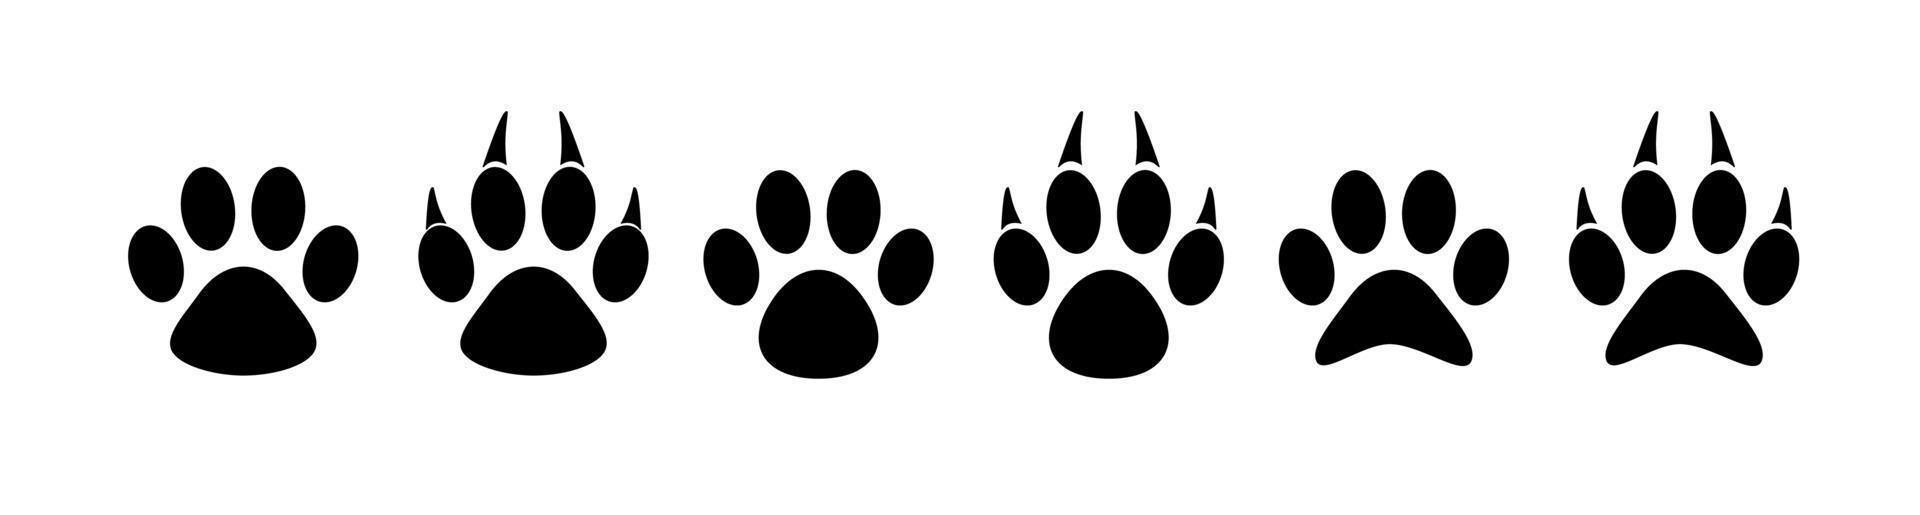 Dog and cat paw prints collection, paw icon set black icon vector